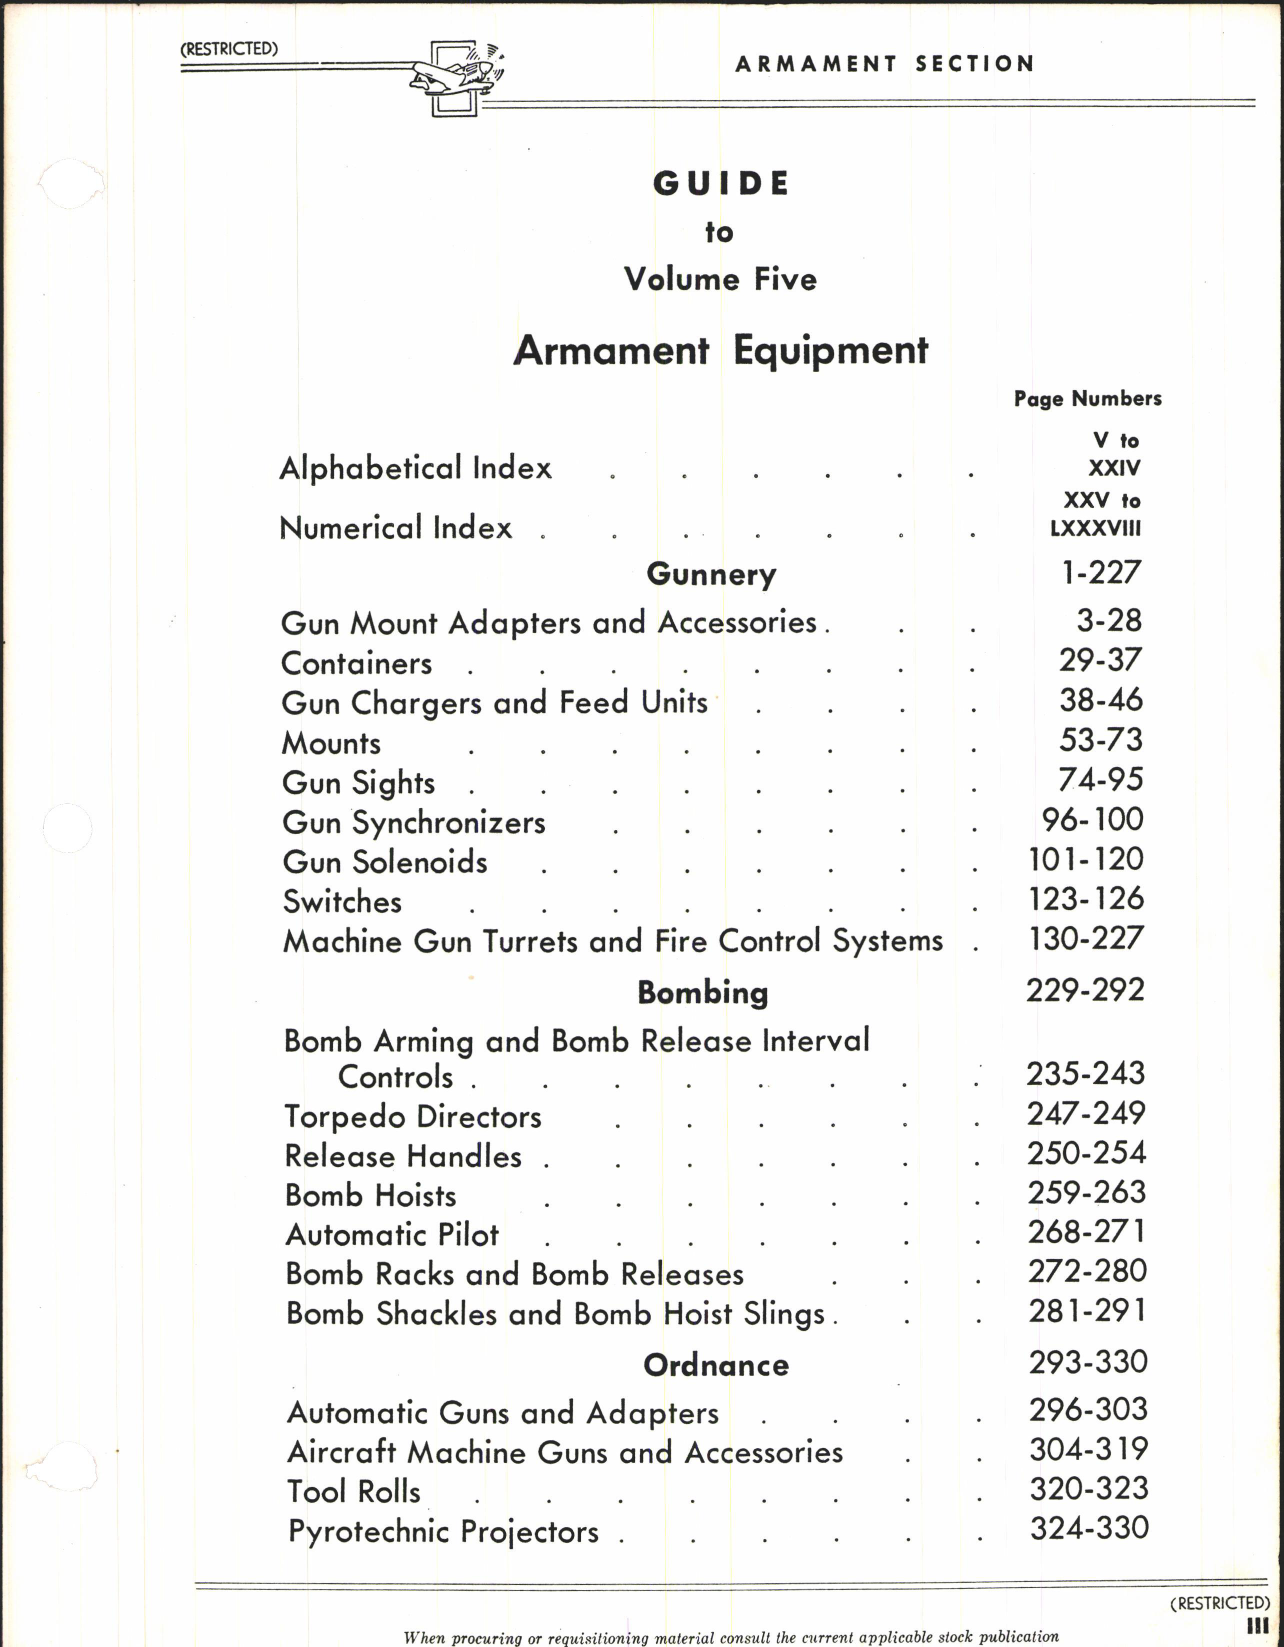 Sample page 5 from AirCorps Library document: Army-Navy Index of Aeronautical Equipment - Armament